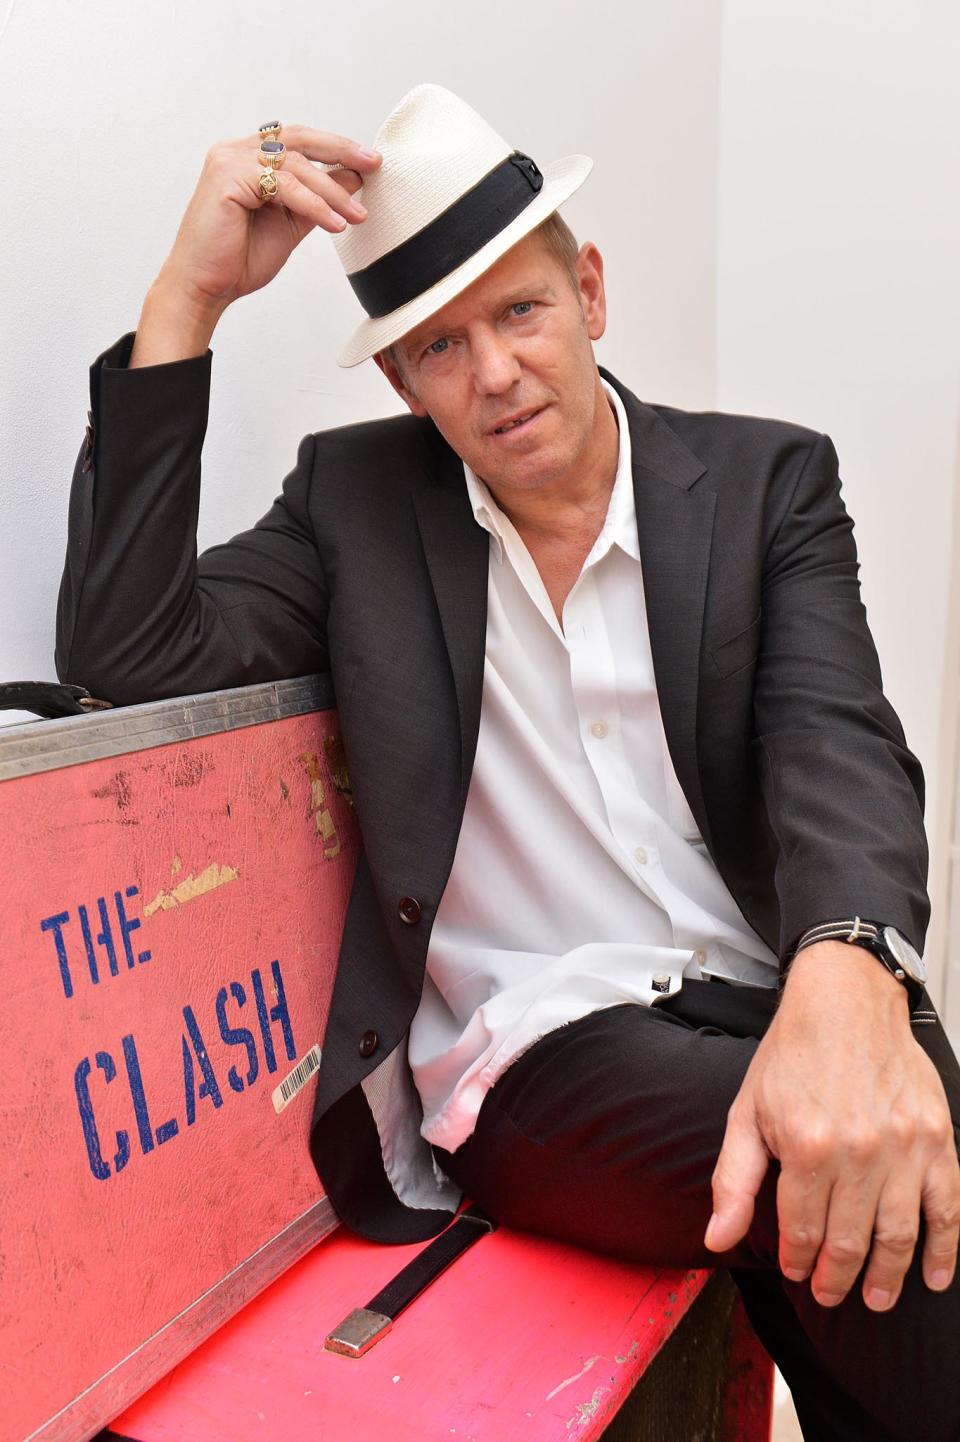 FILE - This Sept. 5, 2013 file photo shows Paul Simonon at the Black Market Clash pop-up exhibition and store in Soho to mark the release of the group's remastered collected works "Sound System" box set in London. Simonon designed the group's new box set to look like a boom box. Lift up the cover and you'll find the complete recorded output of the classic Clash lineup _ the late Joe Strummer, Mick Jones, Simonon and Topper Headon _ with outtakes, videos, fanzines, stickers, a poster and more. The survivors worked a few years to get back control of their music, remaster it and restore the original artwork. (Photo by Mark Allan /Invision/AP)